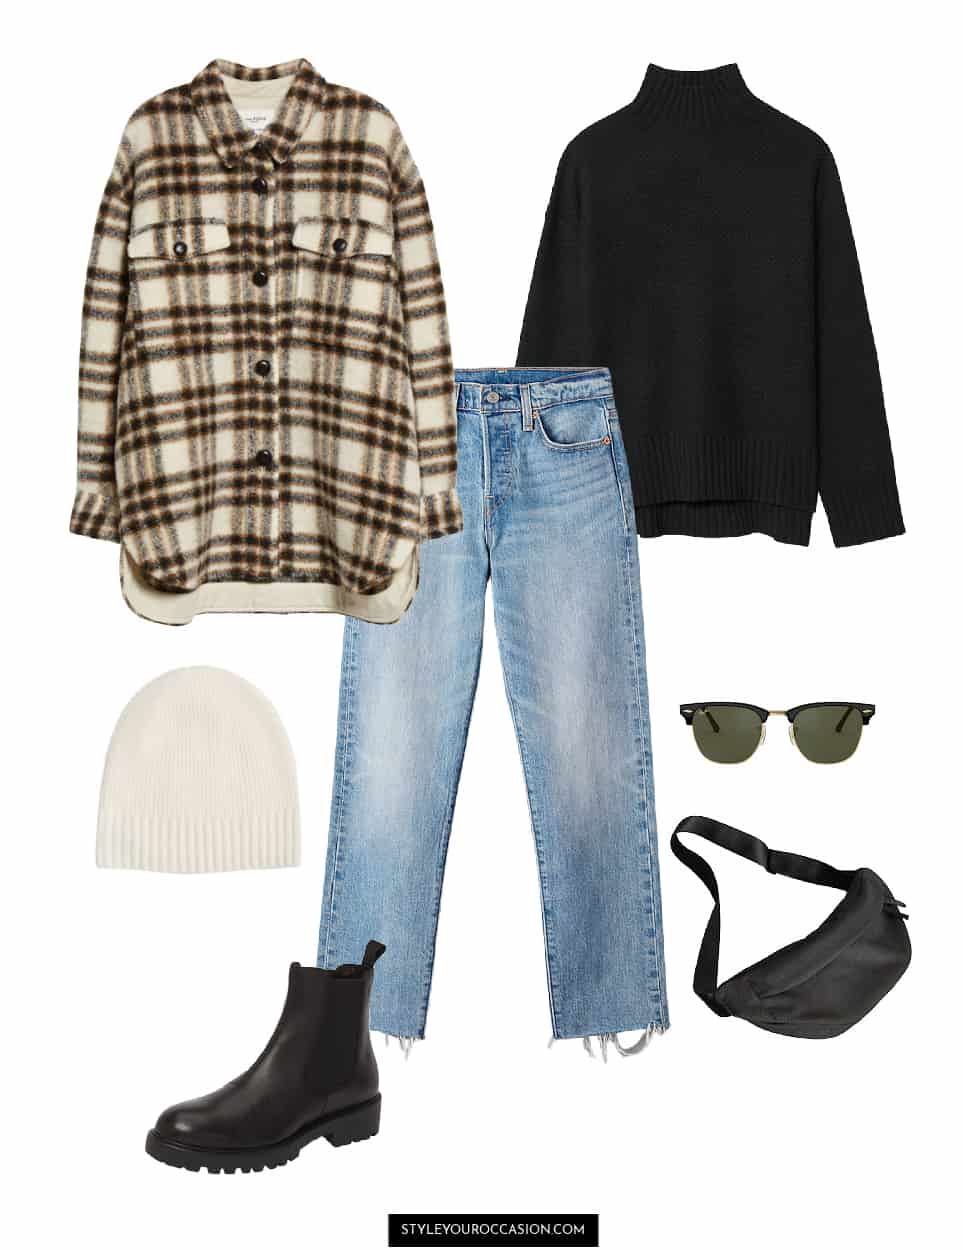 image of an outfit with blue jeans, a plaid shirt jacket, black turtleneck, black boots, ivory beanie, black sling bag, and sunglasses